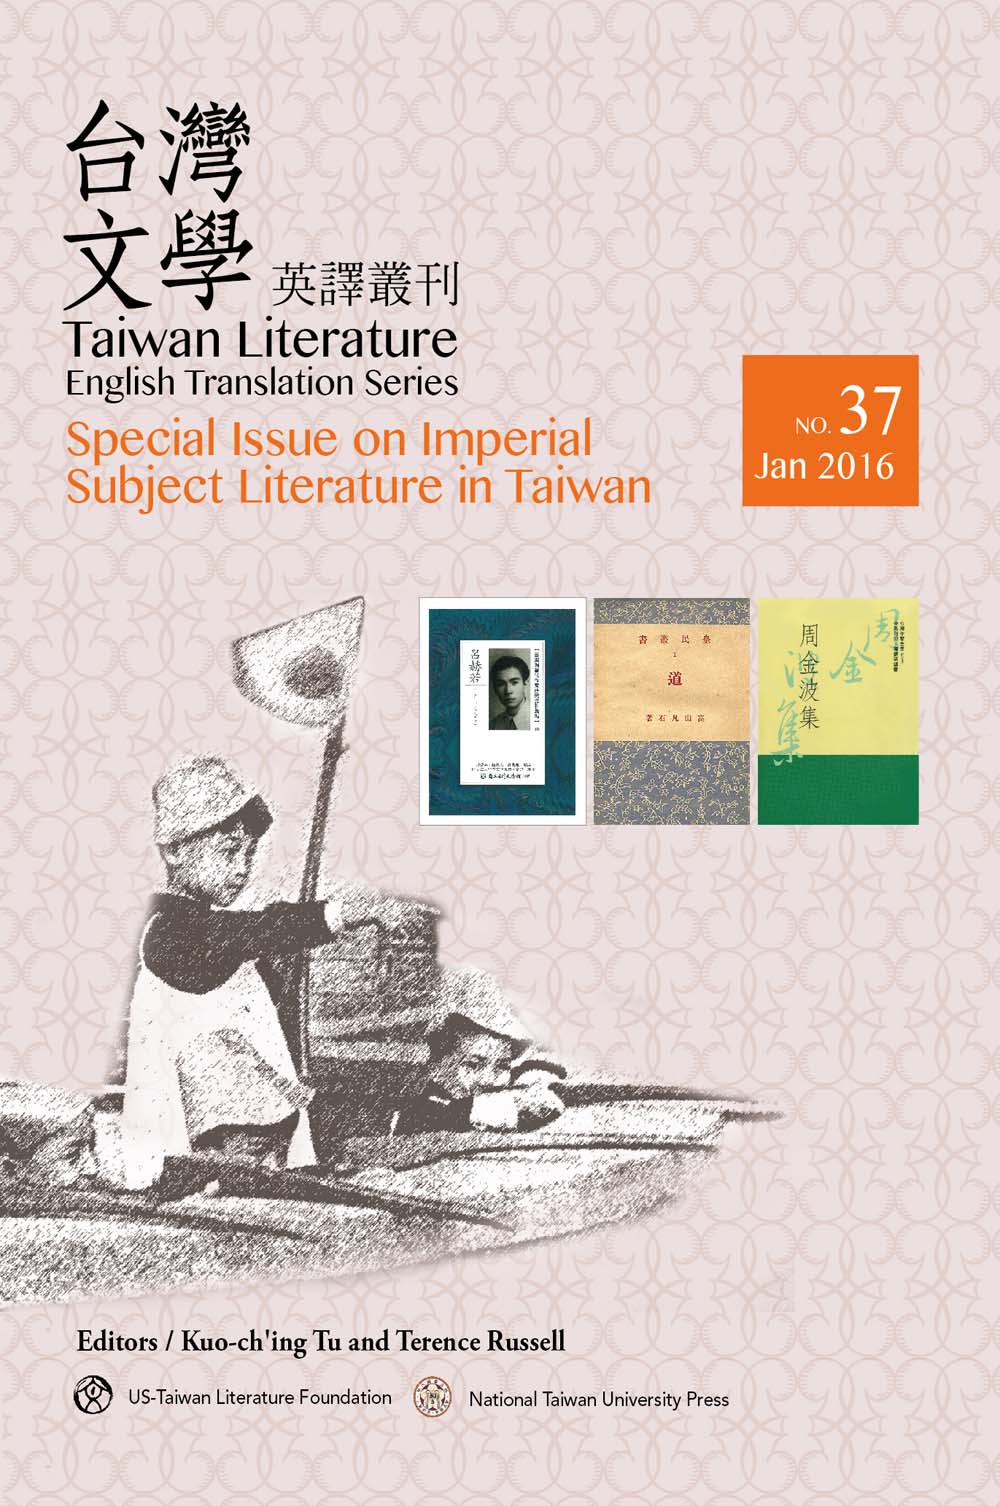 Taiwan Literature: English Translation Series, No. 37 (Special Issue on Imperial Subject Literature in Taiwan)